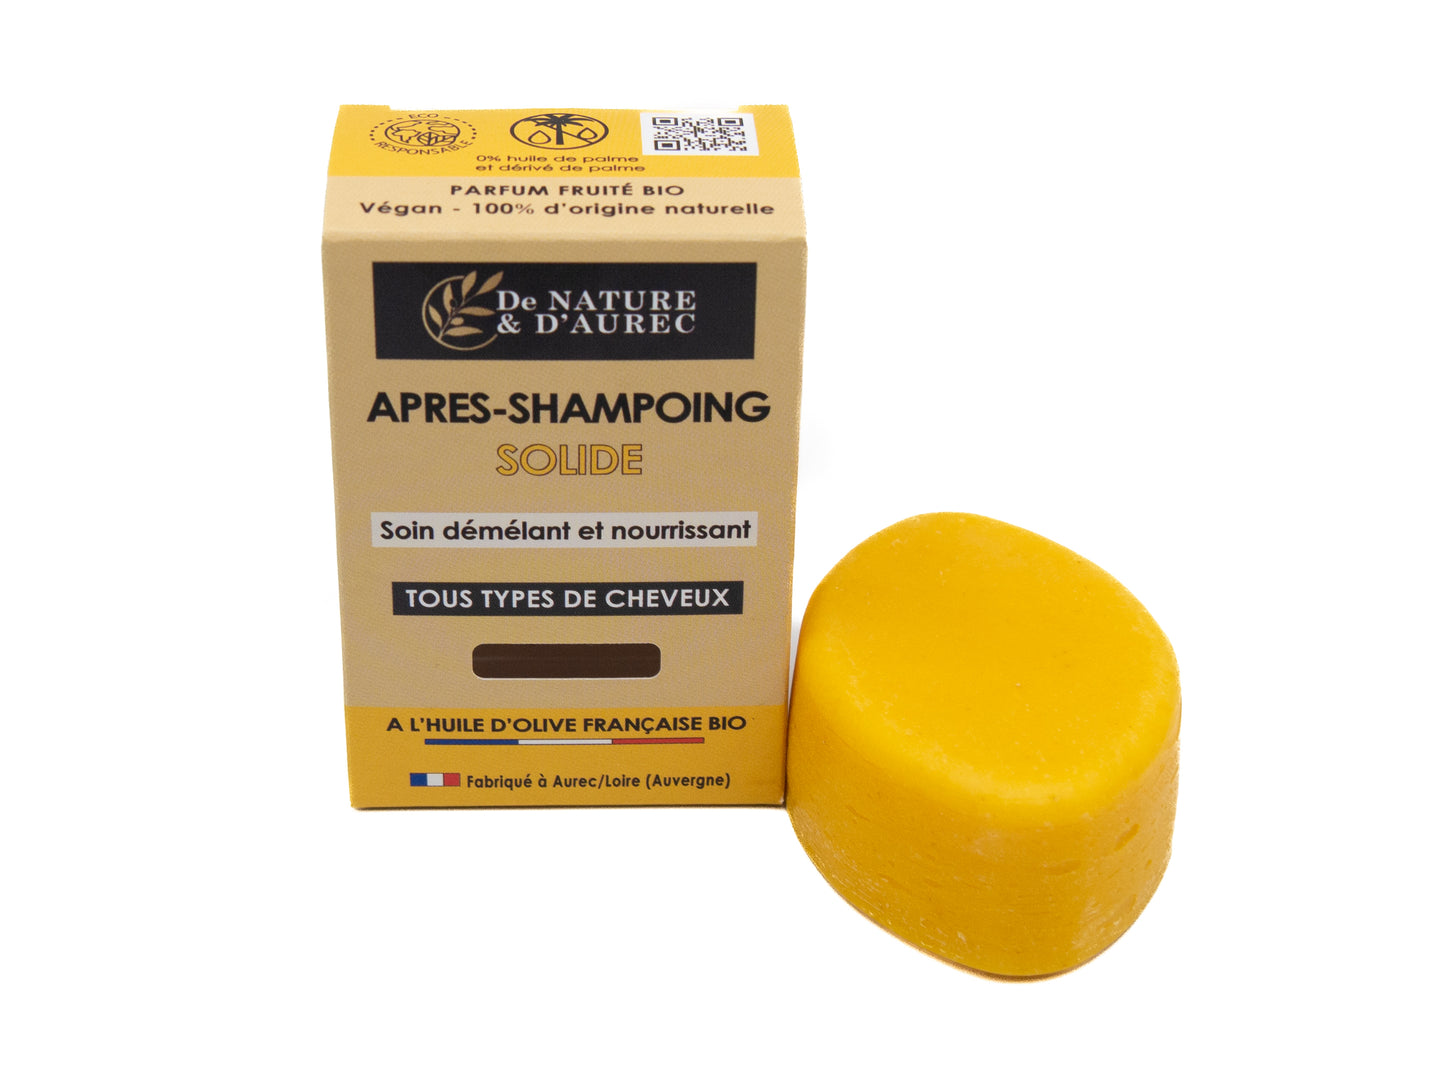 APRES-SHAMPOING SOLIDE